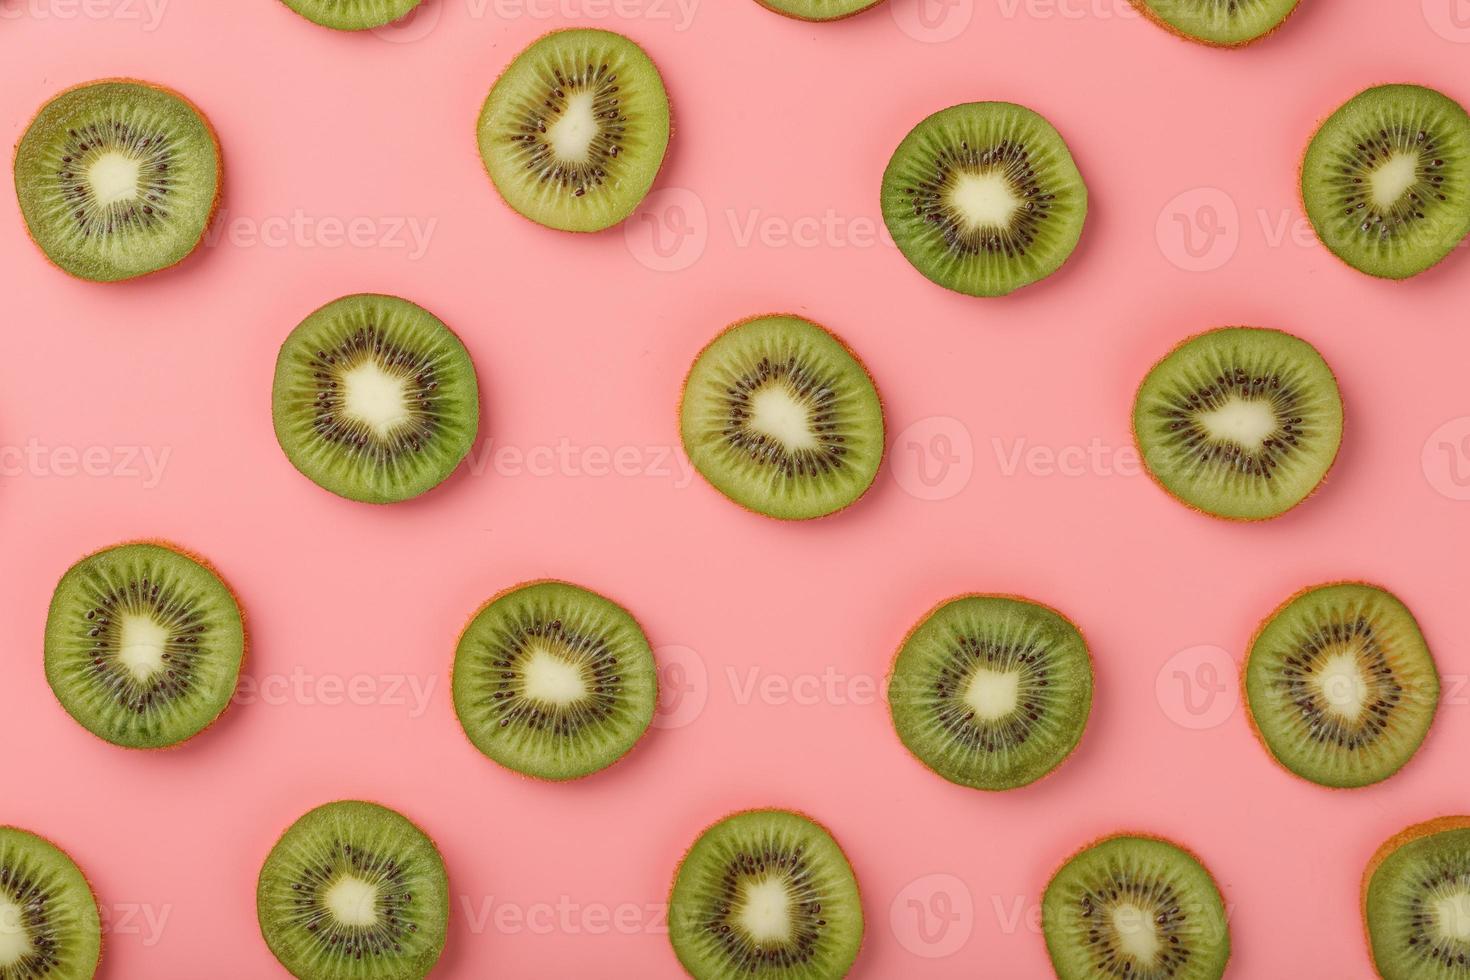 Ripe kiwi slices in patterns on a pink background. photo